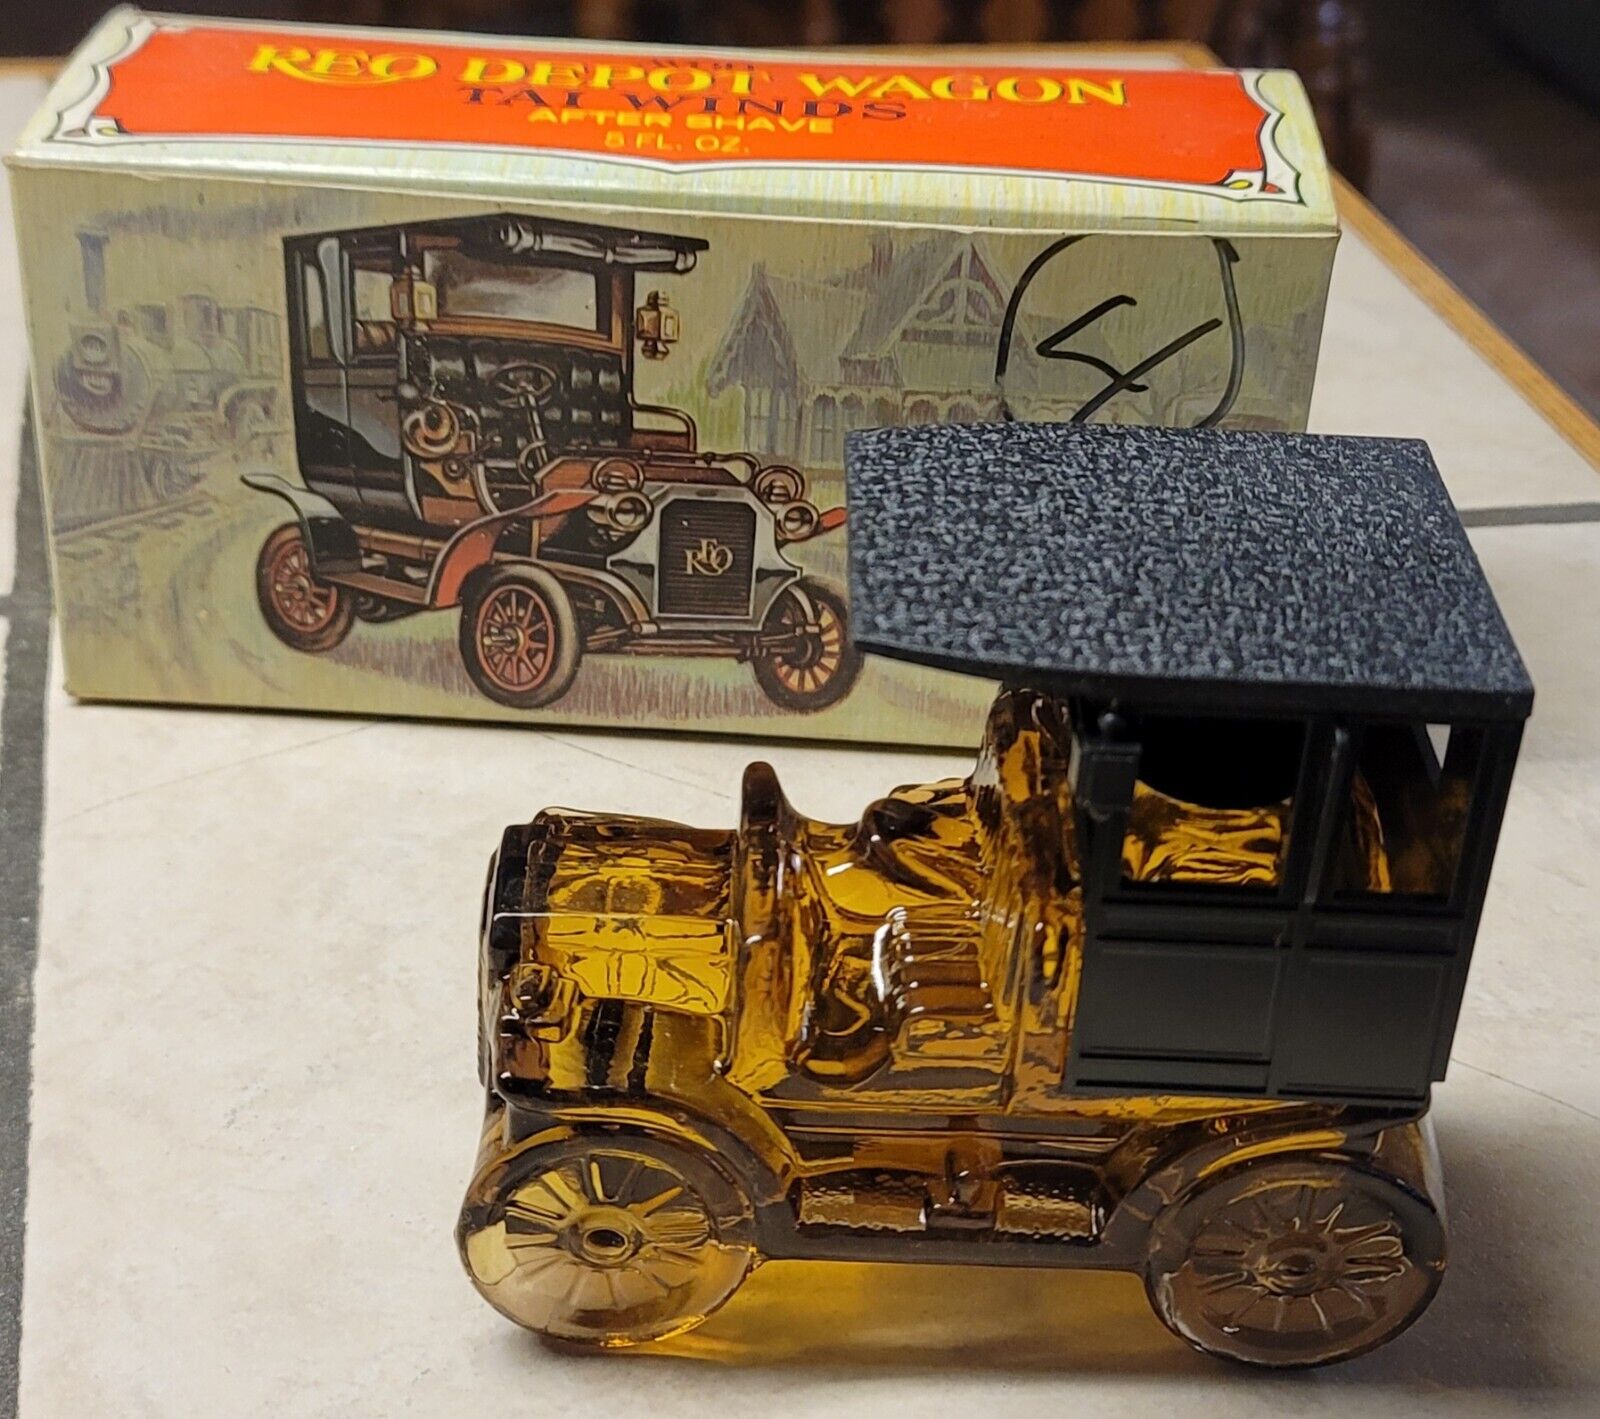 Avon Vintage 1906 Reo Depot Wagon with  After Shave - Full Bottle In Box